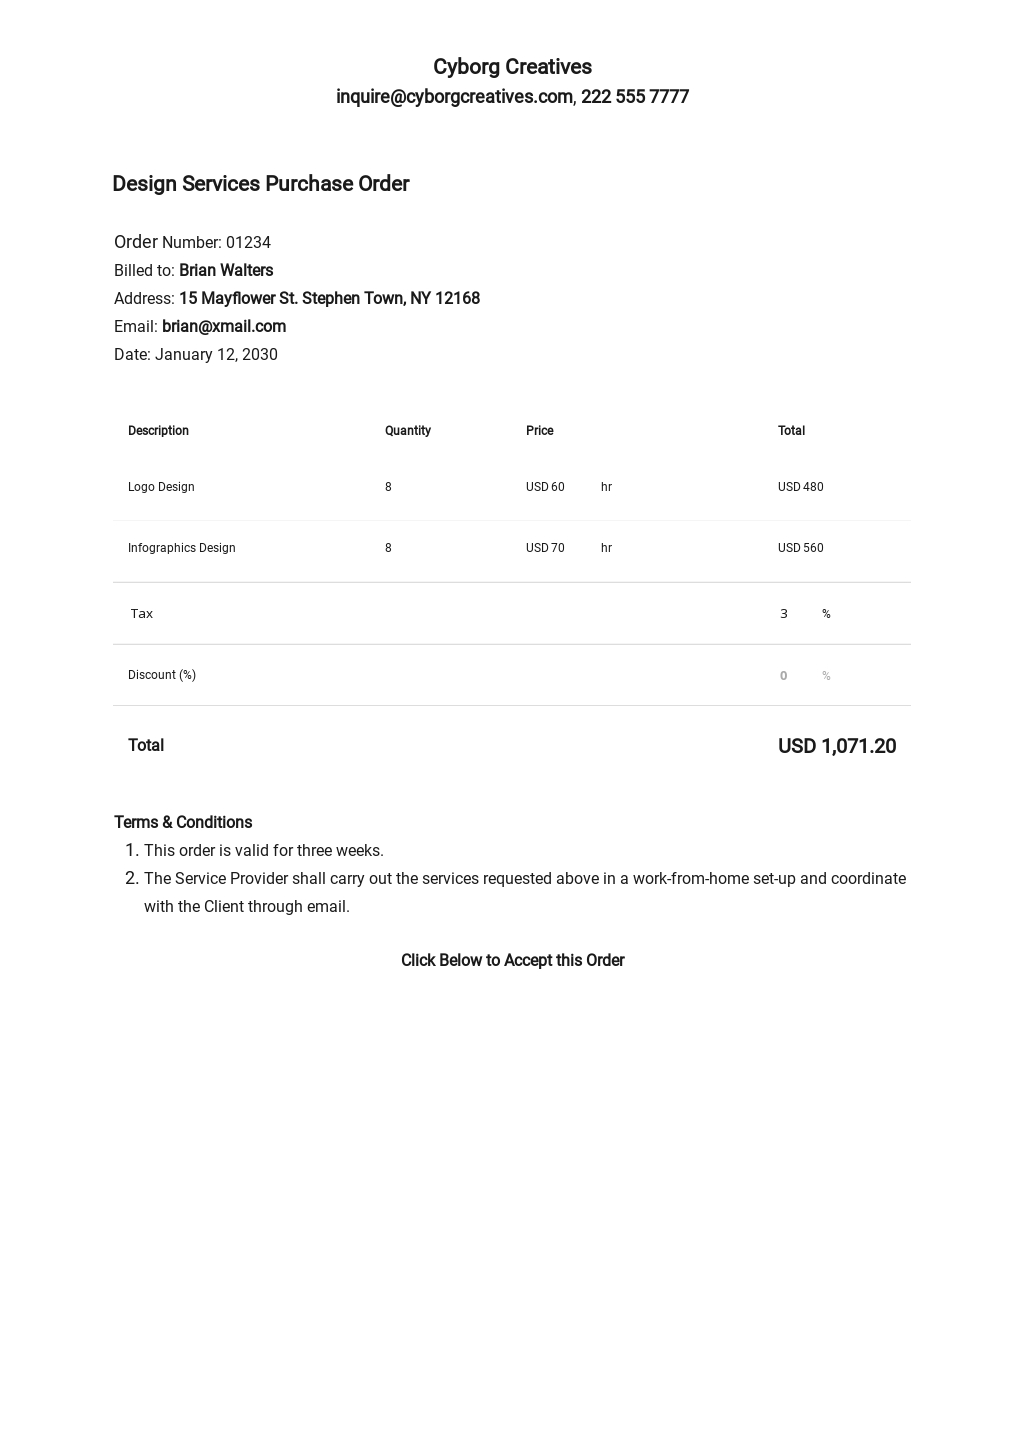 Work From Home Purchase Order Template.jpe